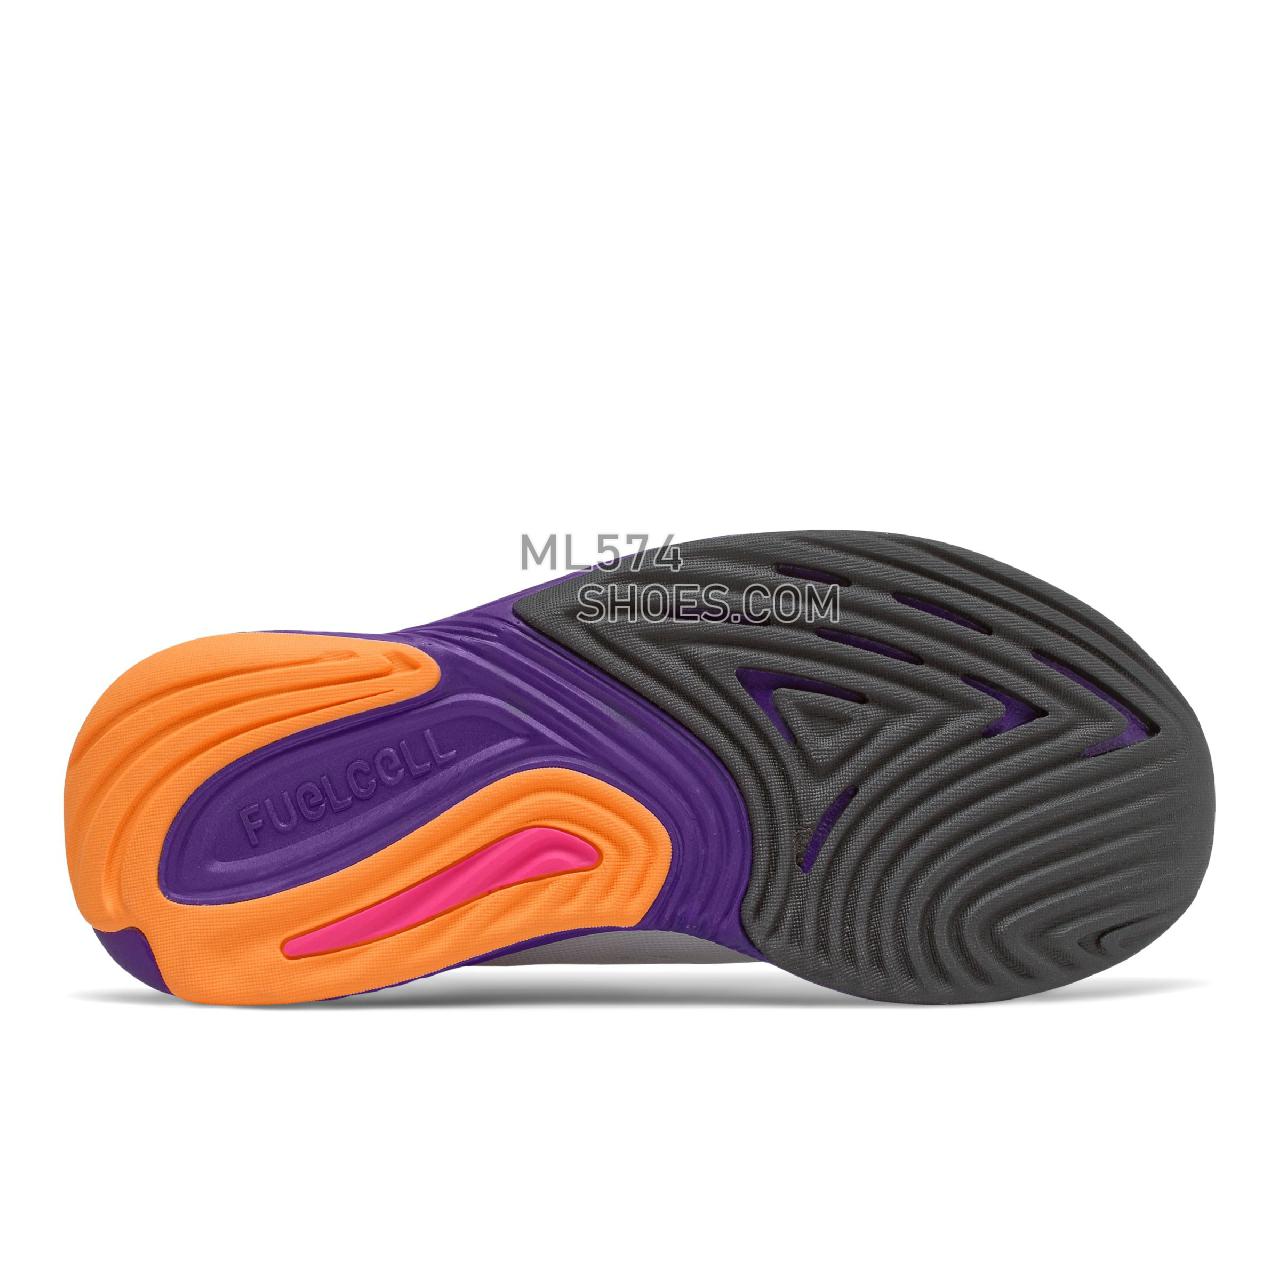 New Balance FuelCell Prism v2 - Women's Fuelcell Sleek And LightWeight - White with Deep Violet - WFCPZLV2